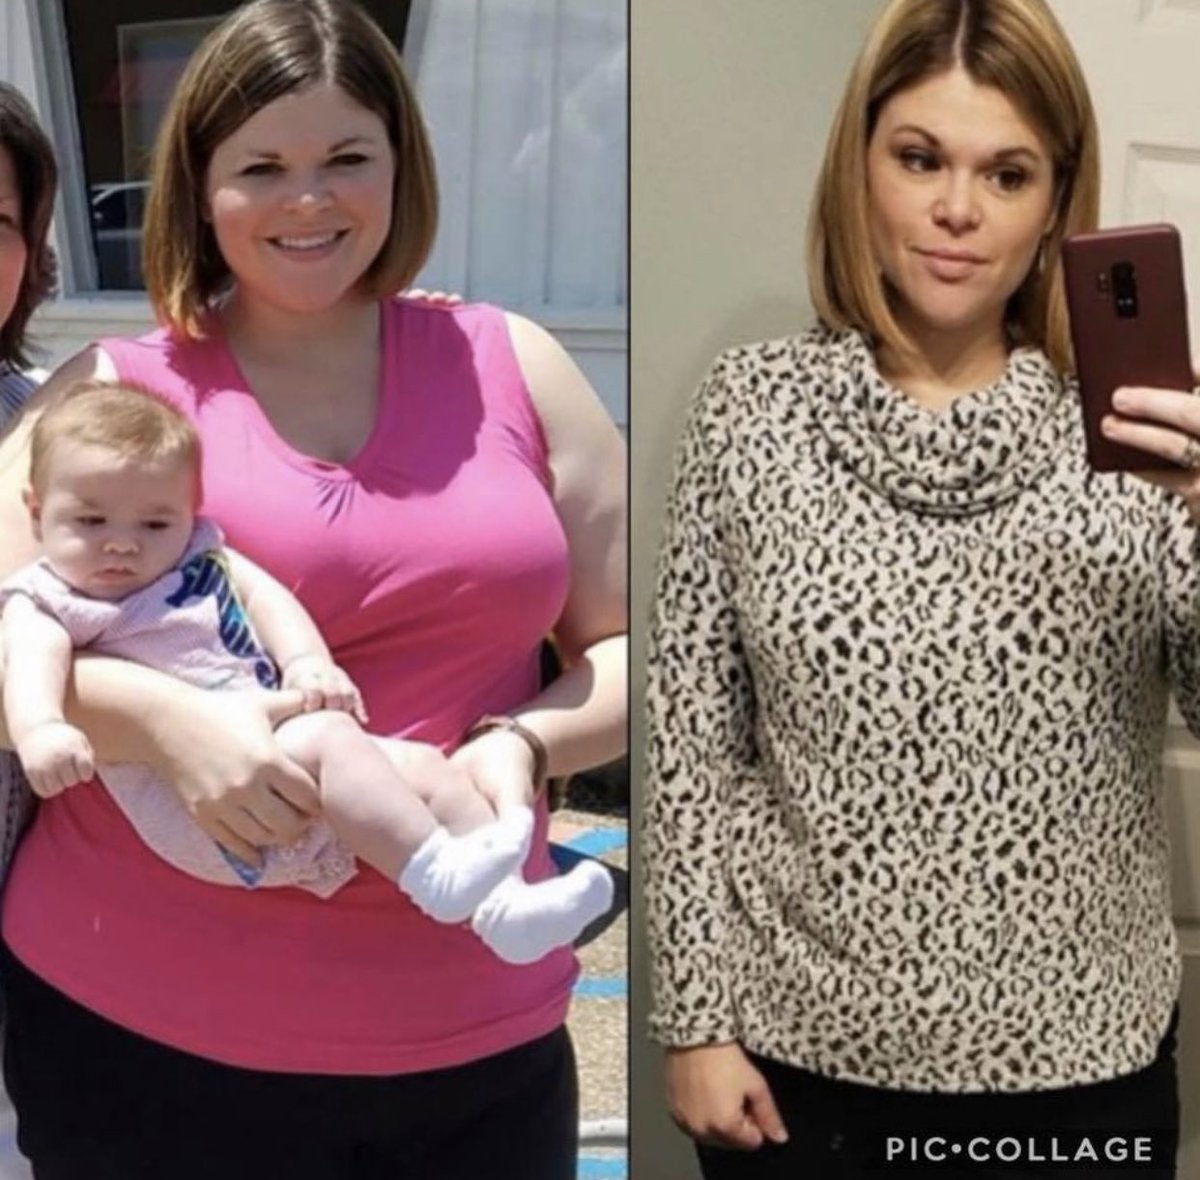 Elizabeth Ann lost 60 pounds with Sensible Meals and no exercise. Show her some love! “ I couldn’t have done it without my meals it gave me control over my eating again!” #sensiblemeals #mealprep #weightloss #lostover50lbs #portioncontrol #healthymom #quarantine #mealprepdelivery